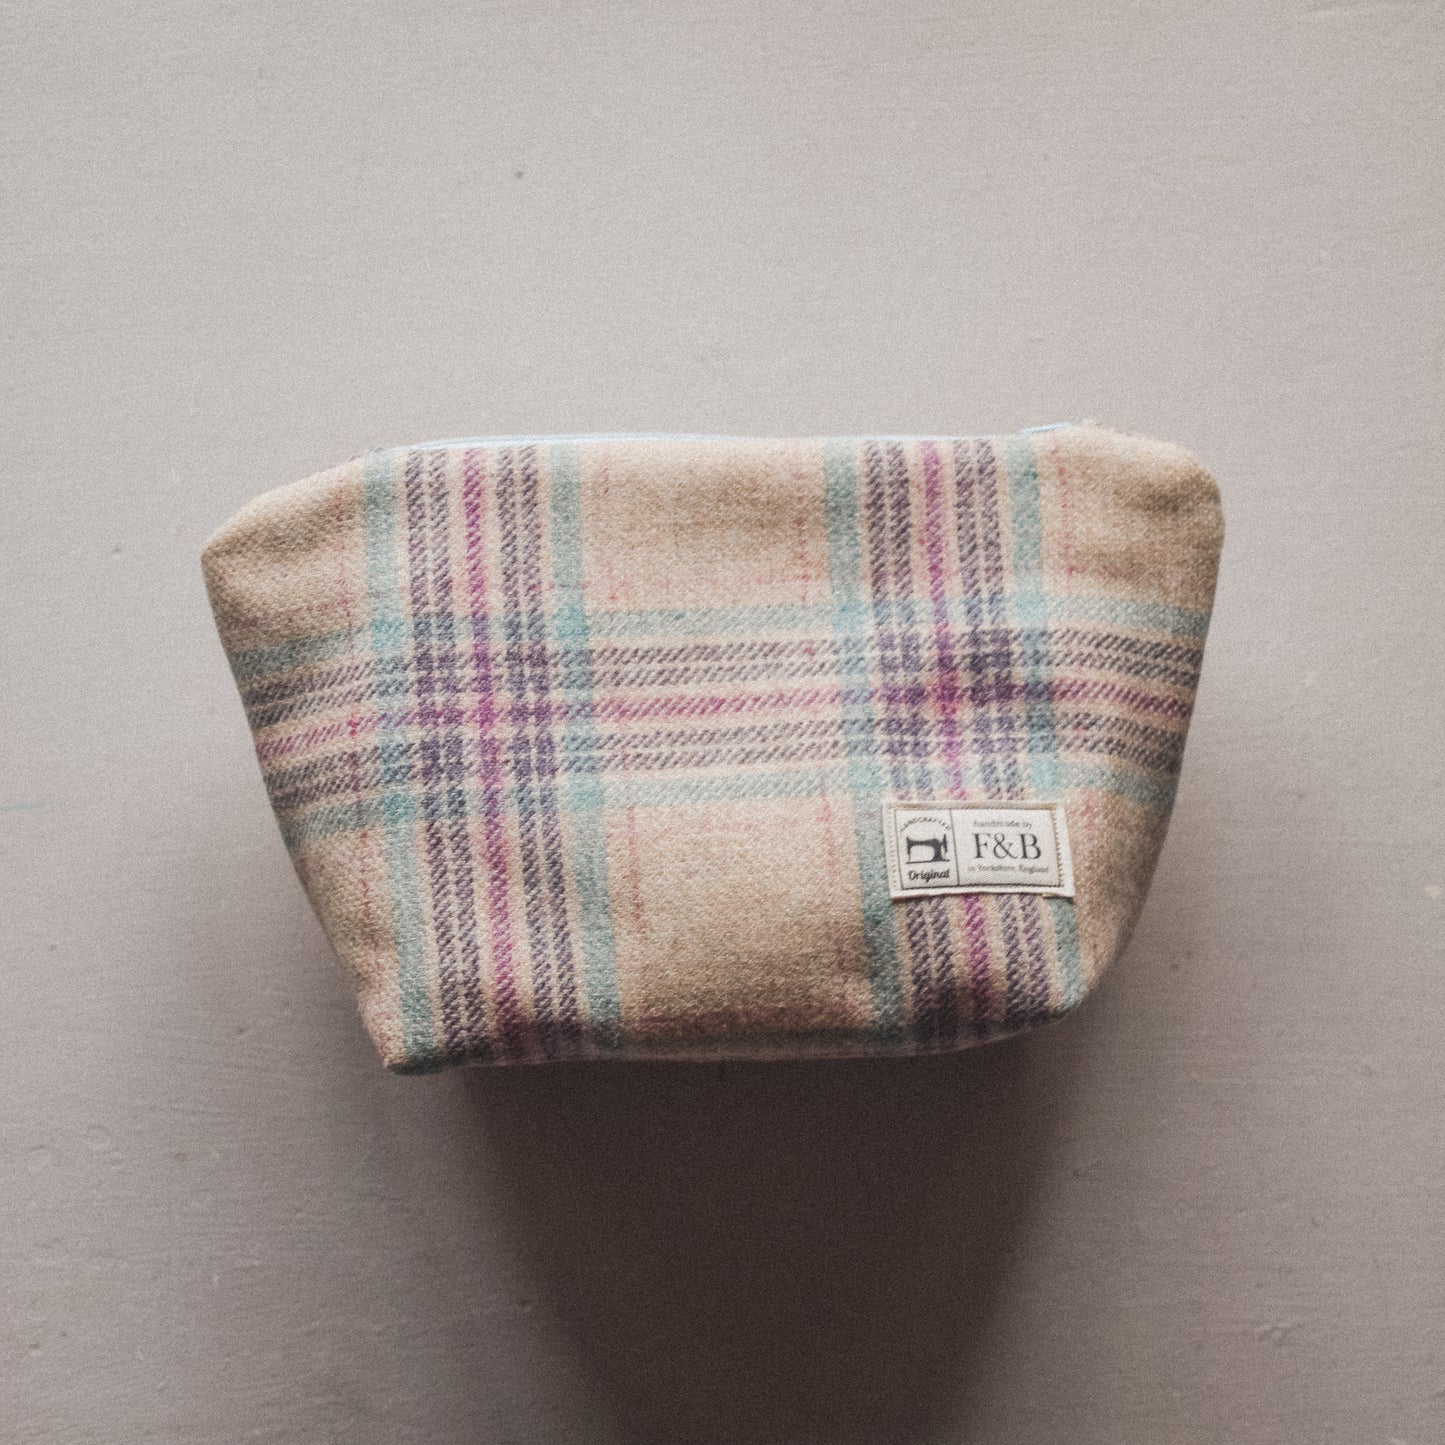 Cream Light Blue, Light Pink and Purple Tweed linnet wash bag by F&B - Country Accessories